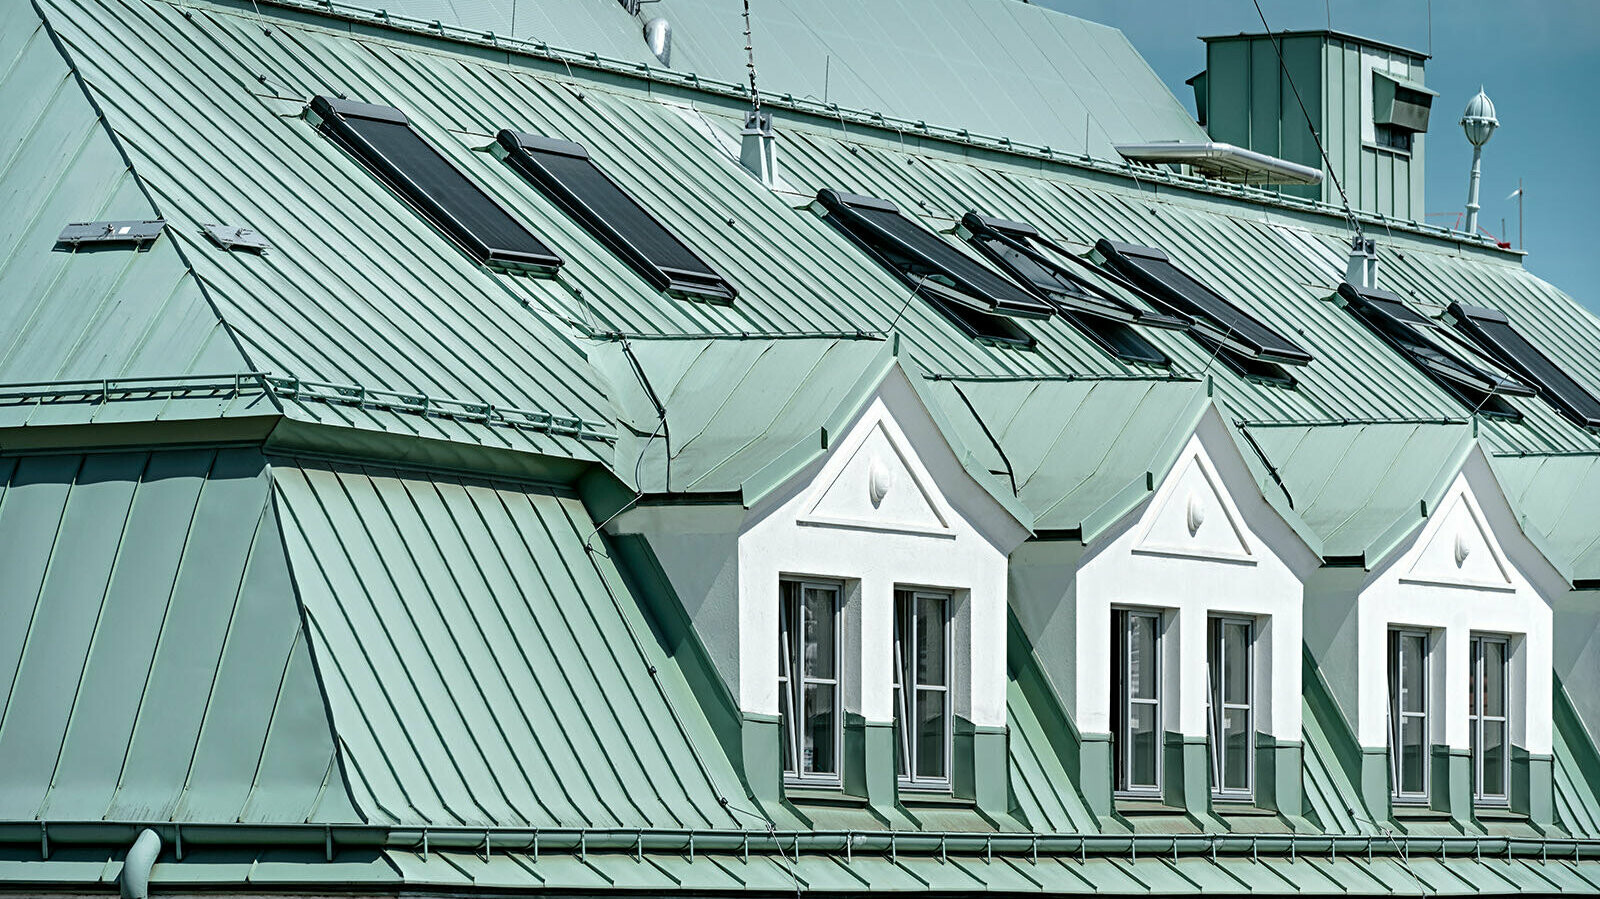 Close-up view of the Prefalz roof in P.10 patina green. Some windows of the building can be seen.